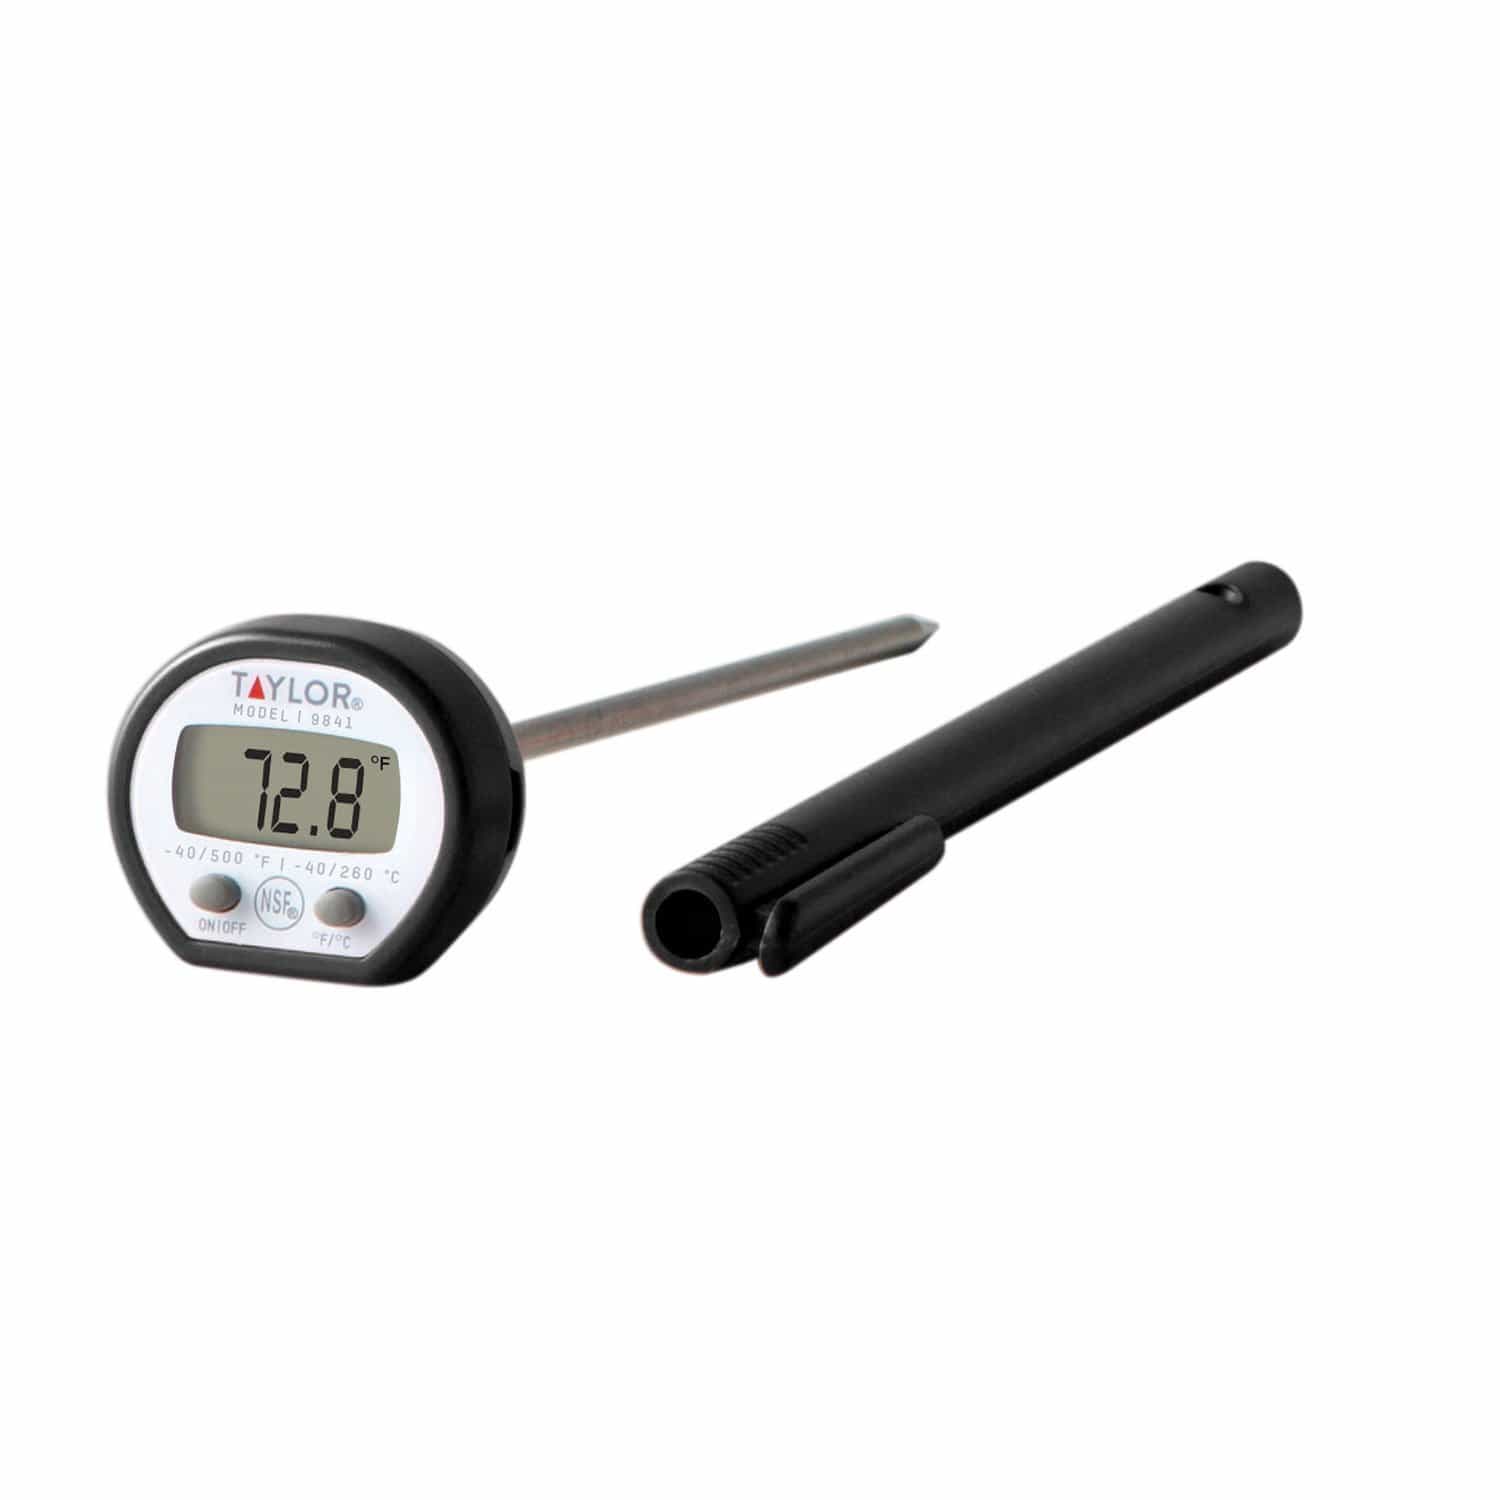 Digital Thermometer With Rod Incoterm 9791 - English